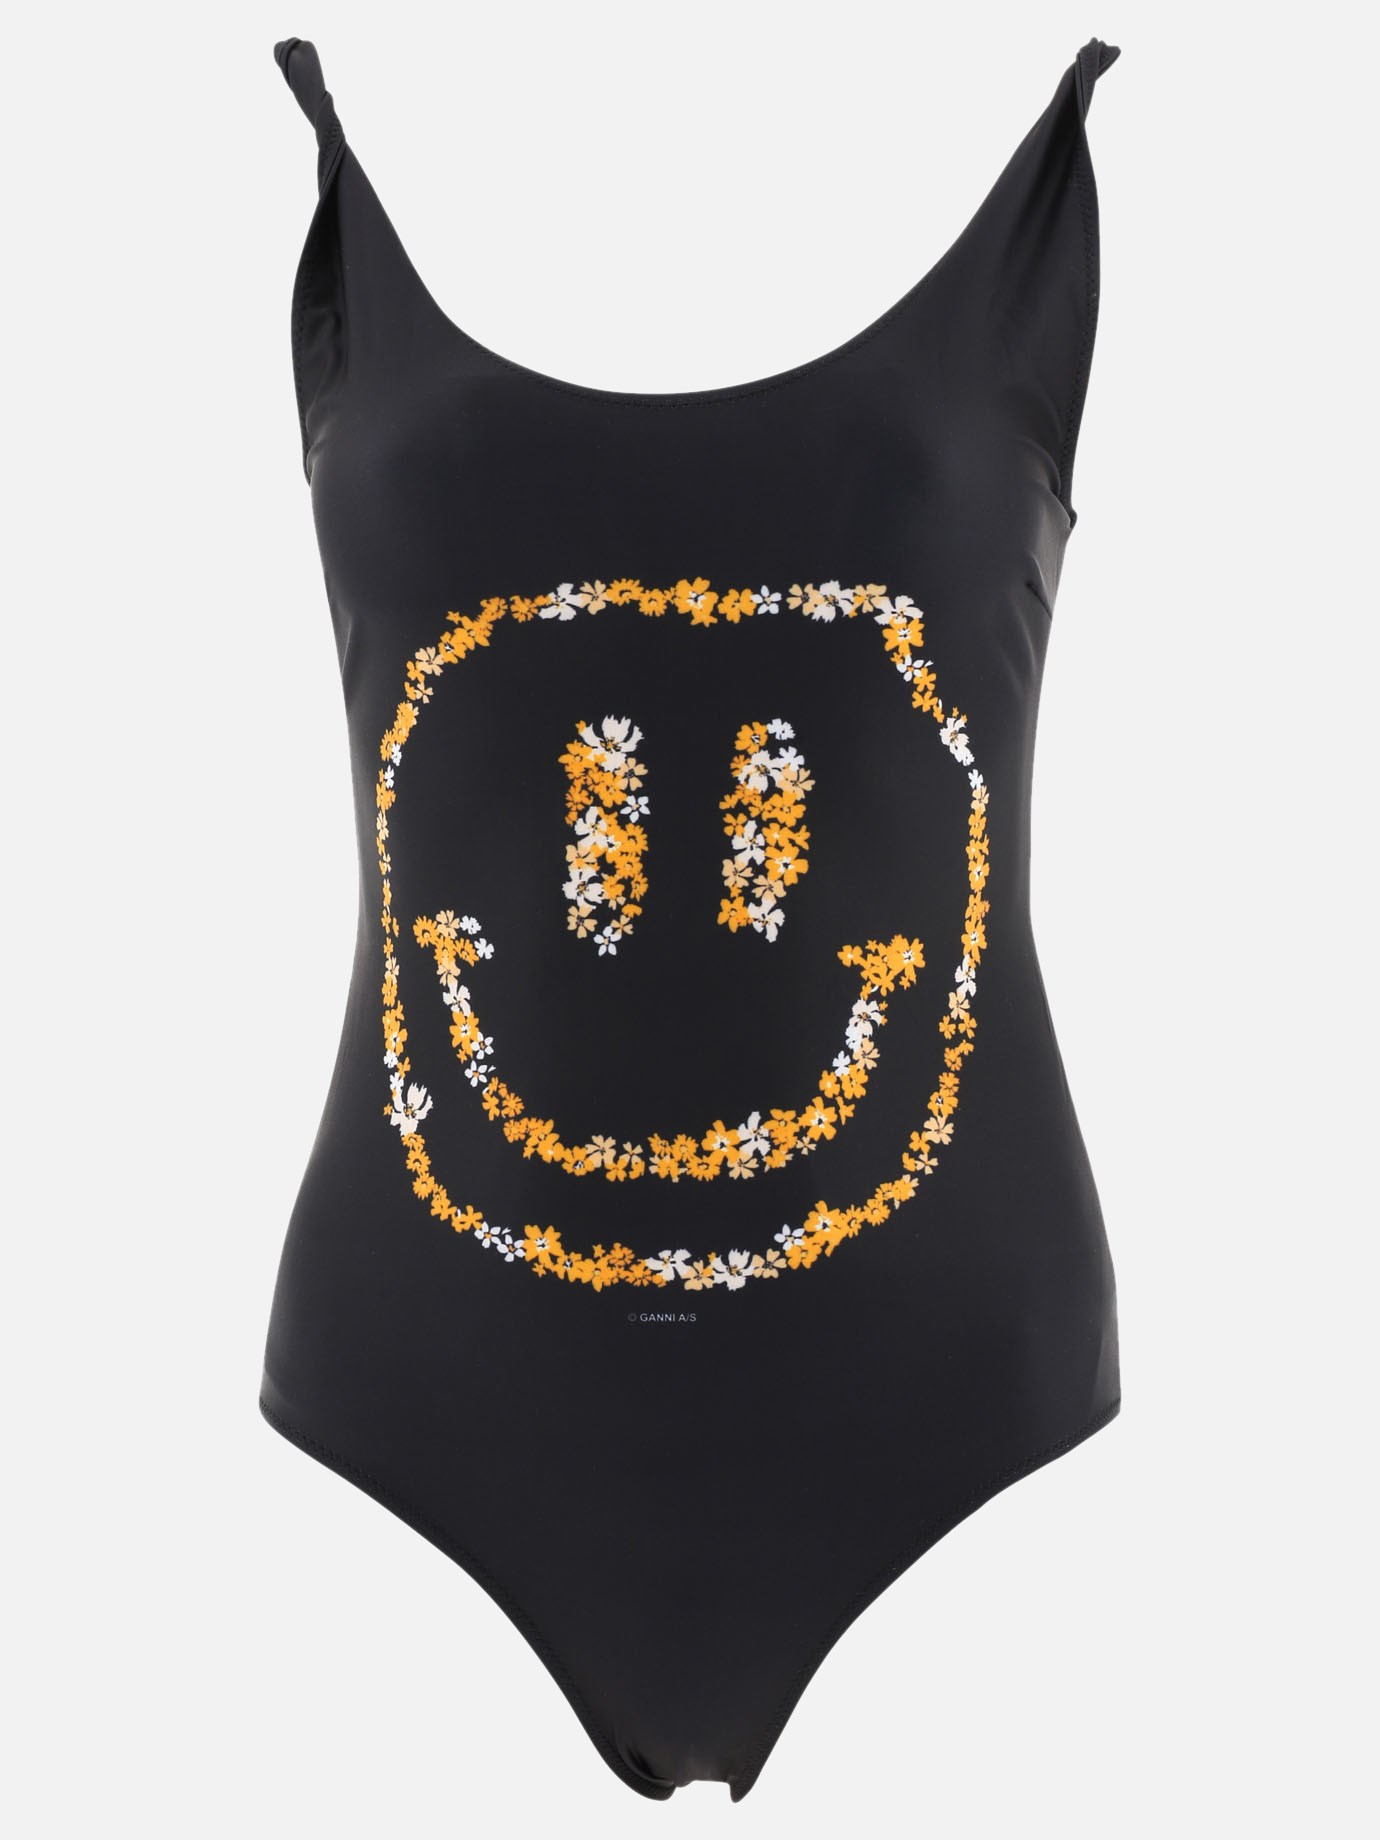  Smiley  swimsuitby Ganni - 0